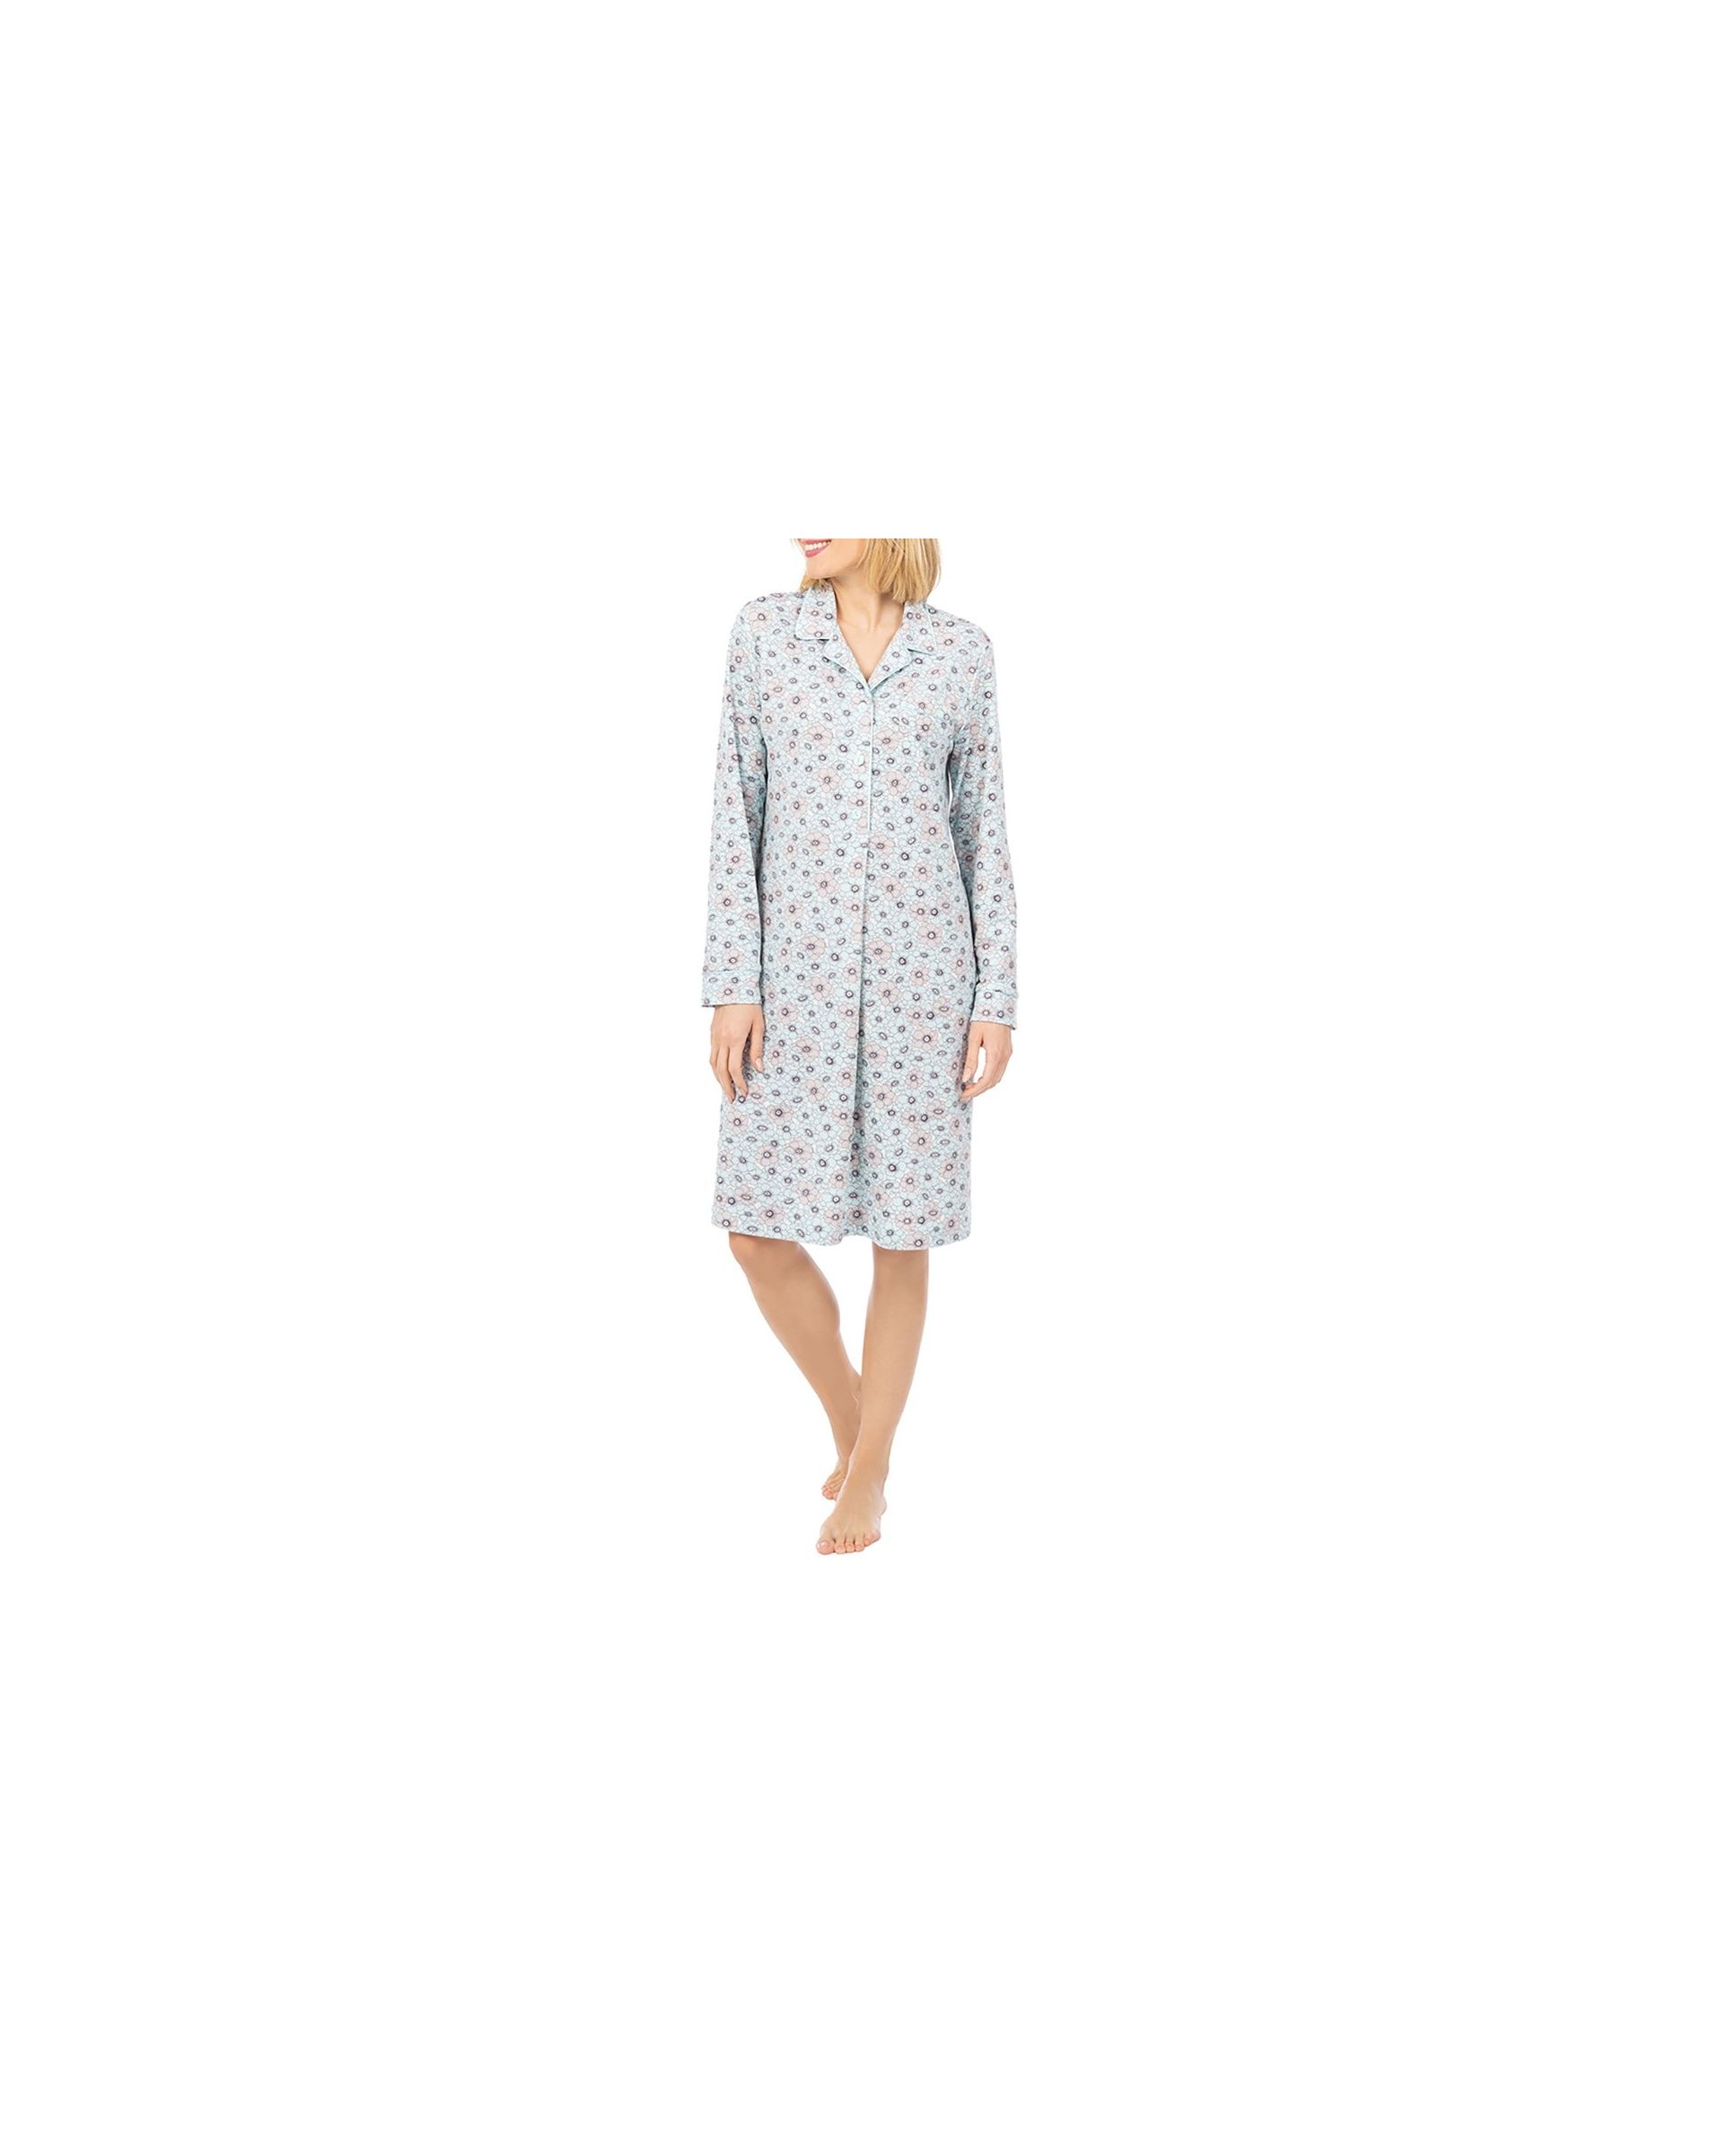 Open nightdress with short floral buttons